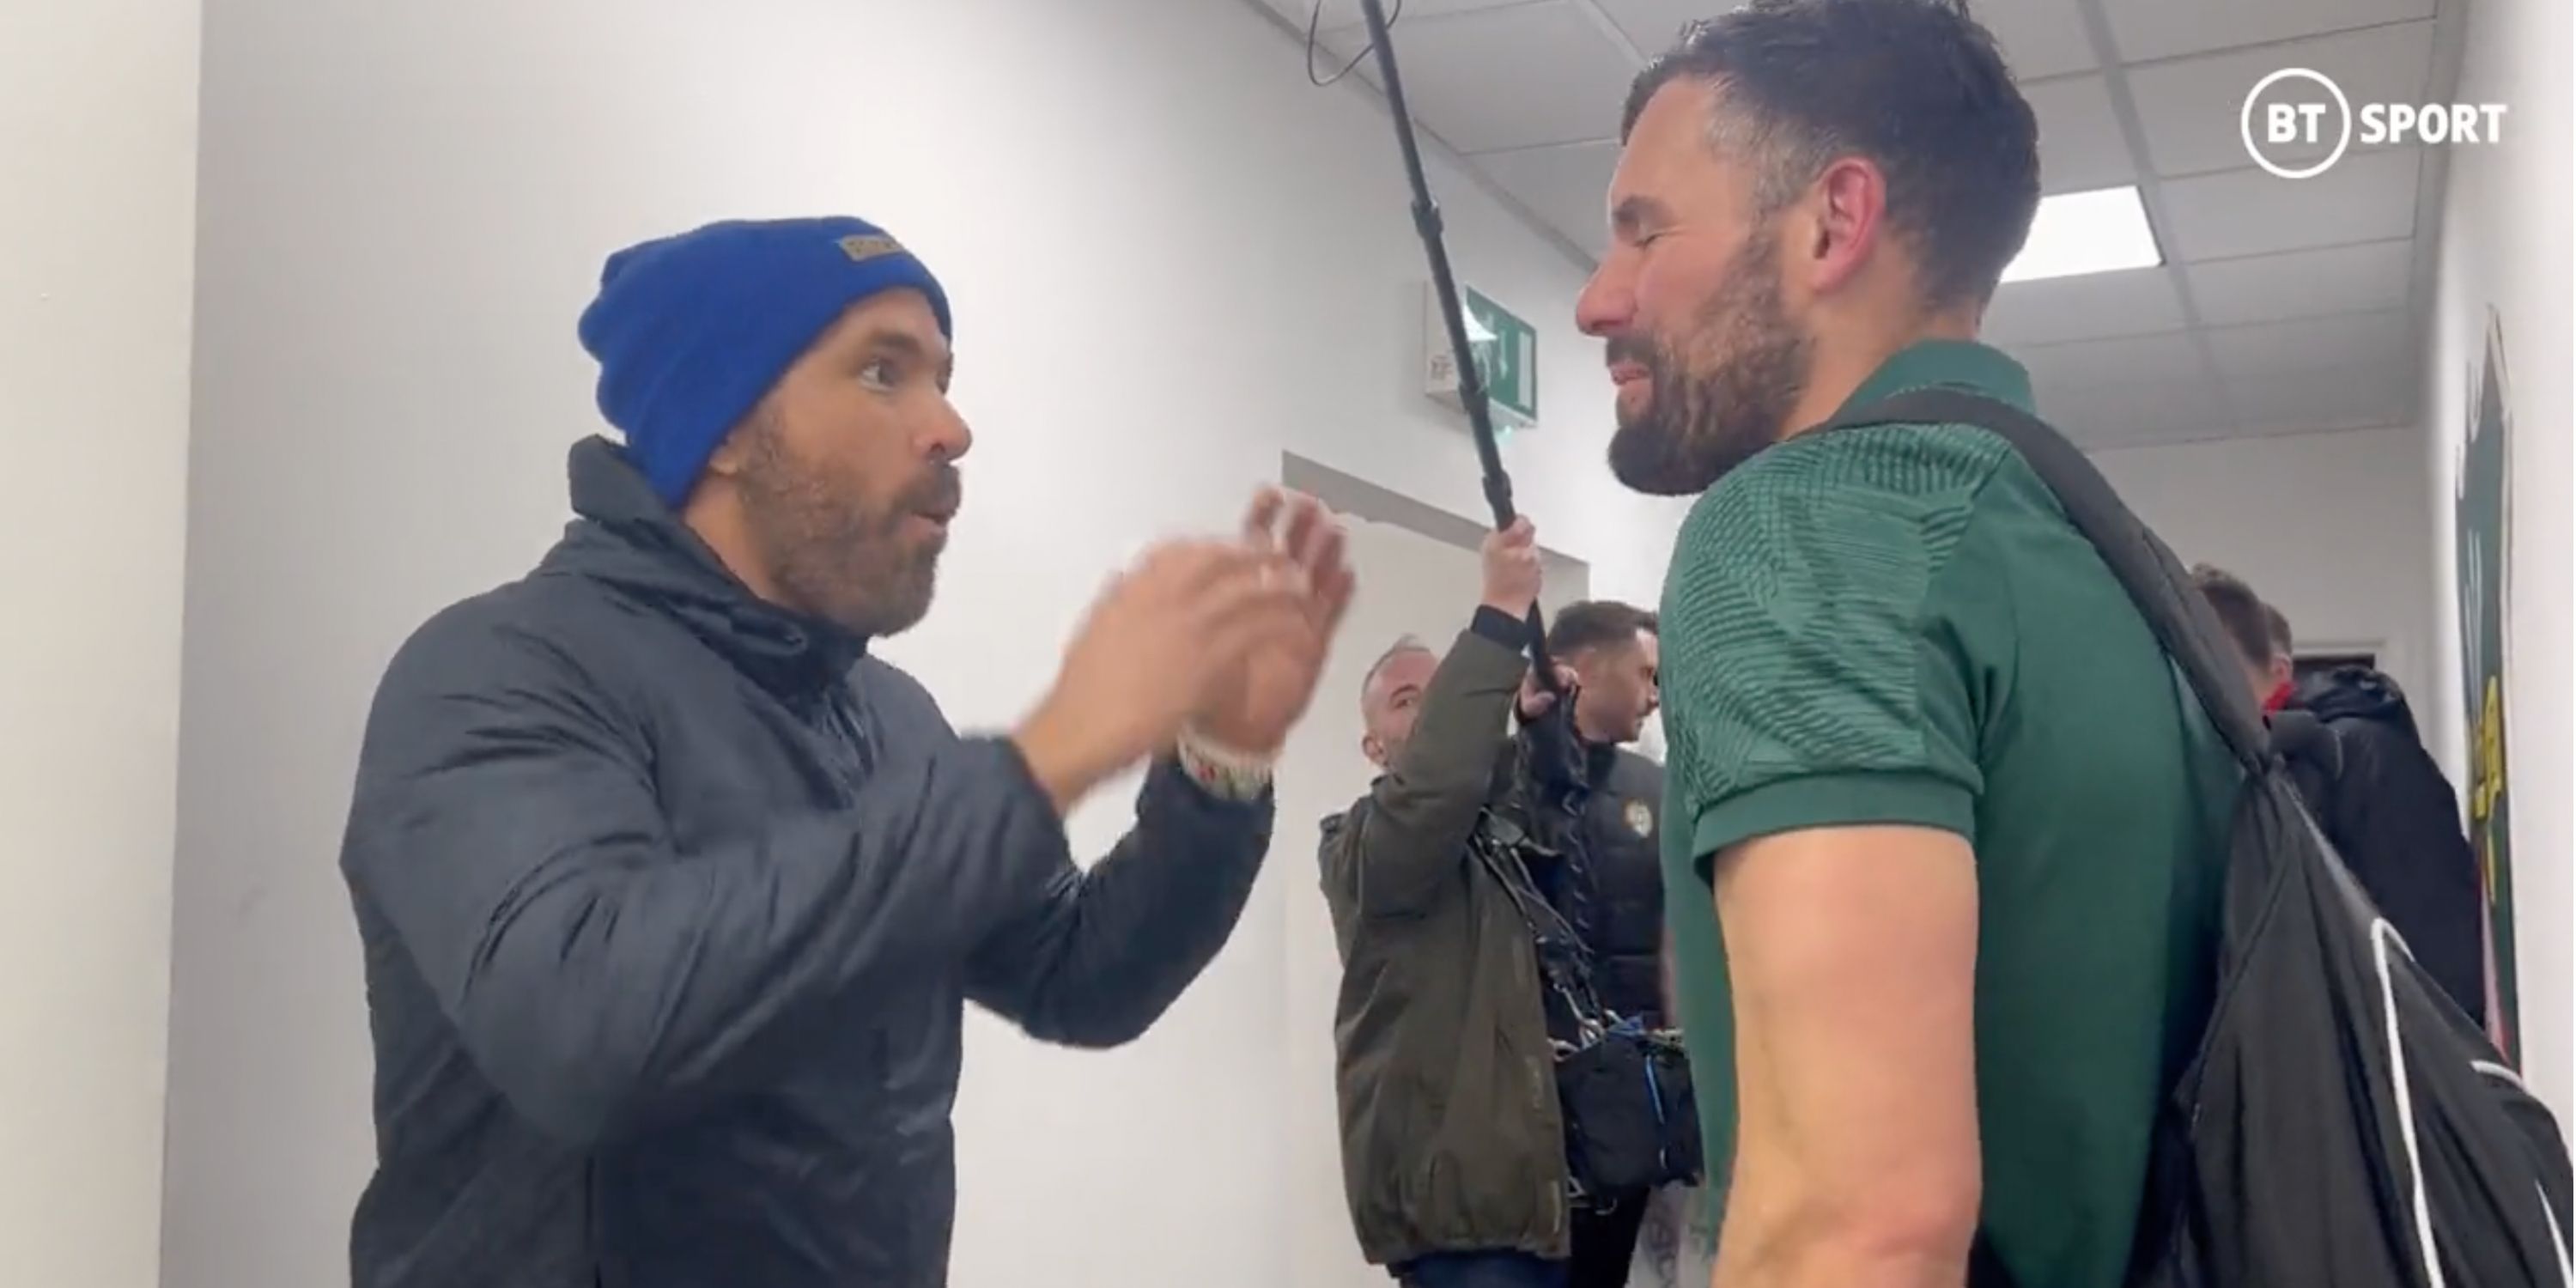 Ryan Reynolds' wholesome exchange with Ben Foster in the tunnel after Wrexham 3-2 Notts County